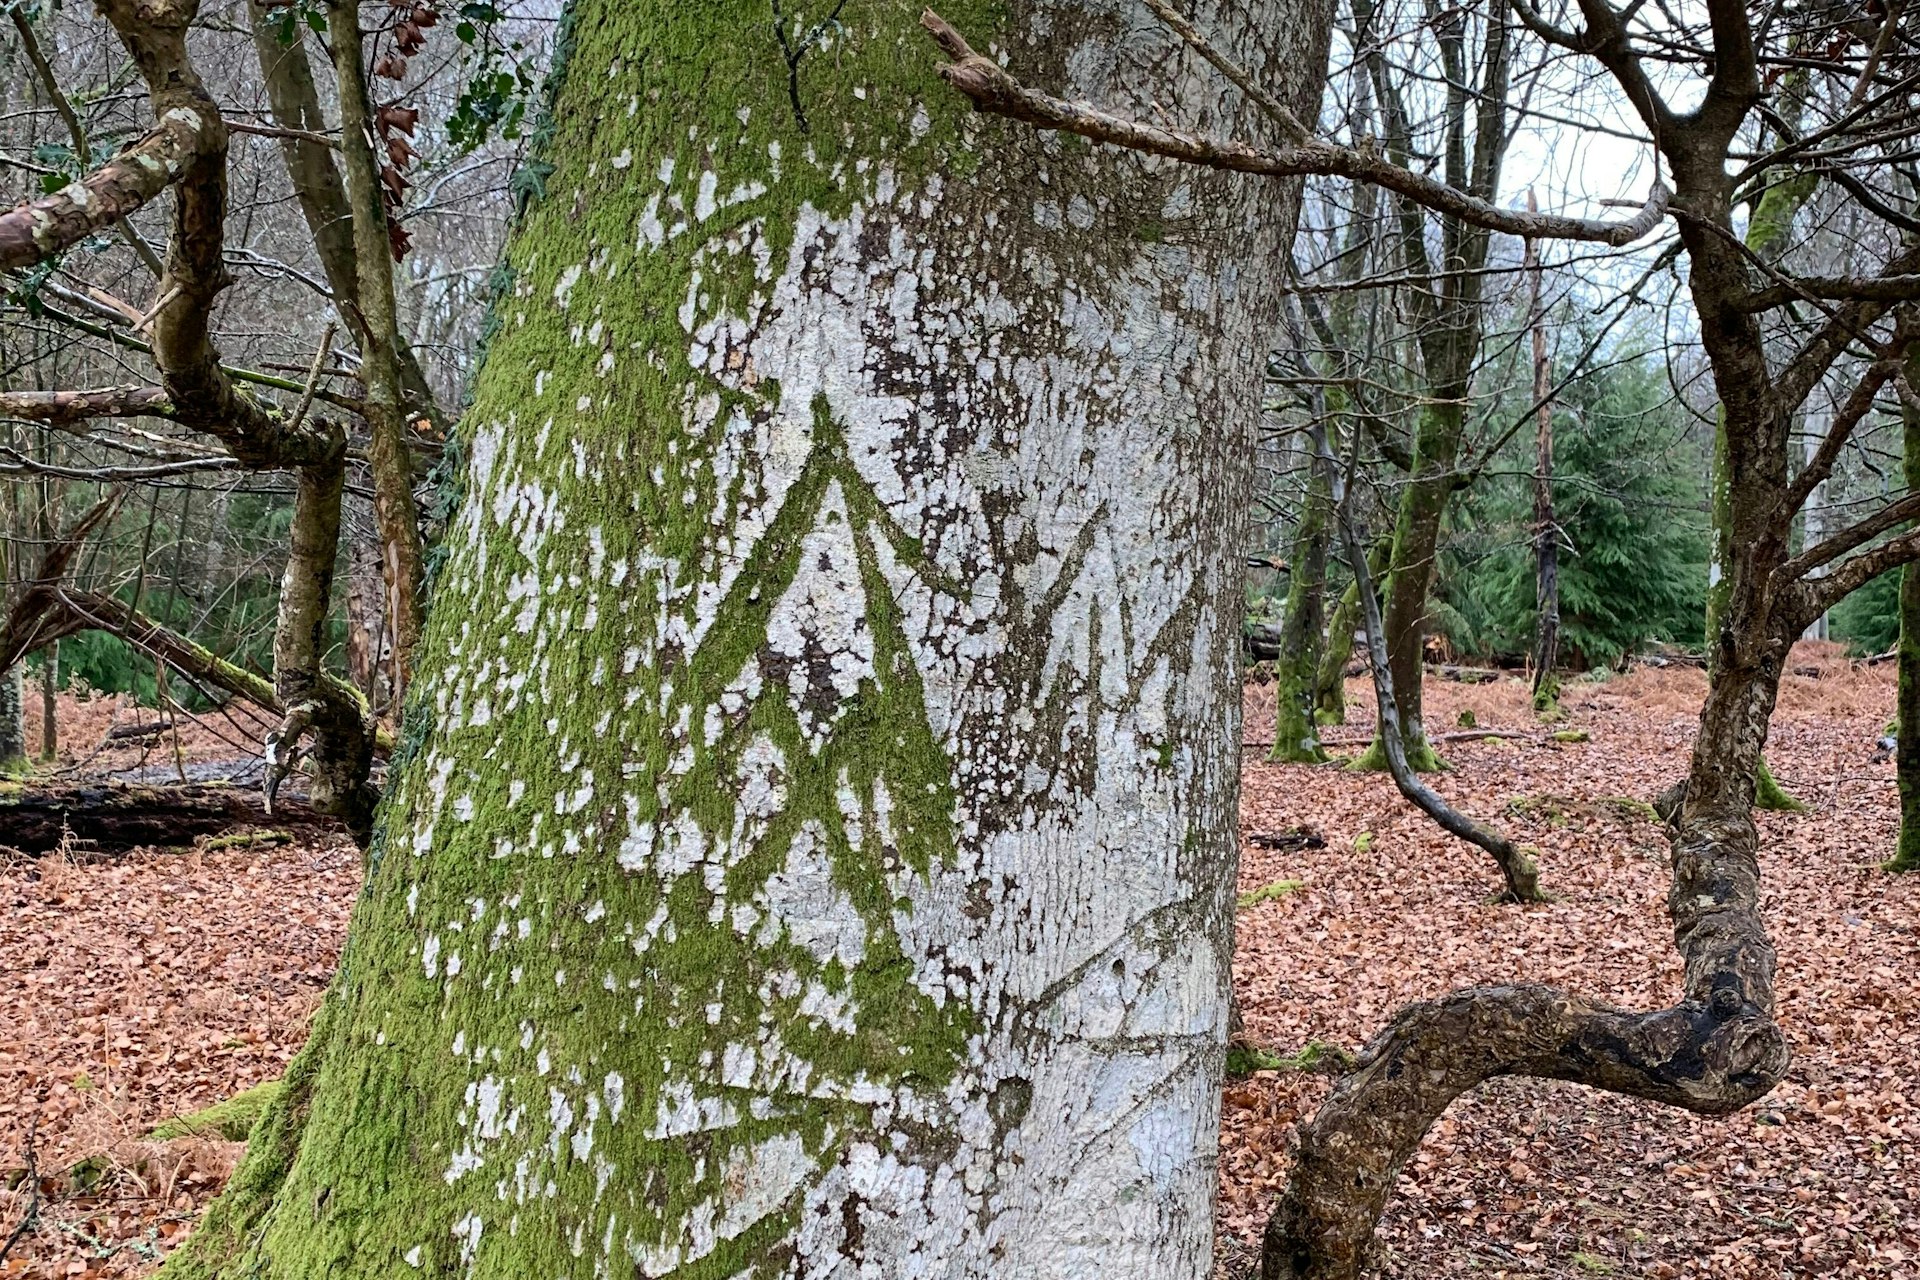 Graffiti carved into a tree in the New Forest